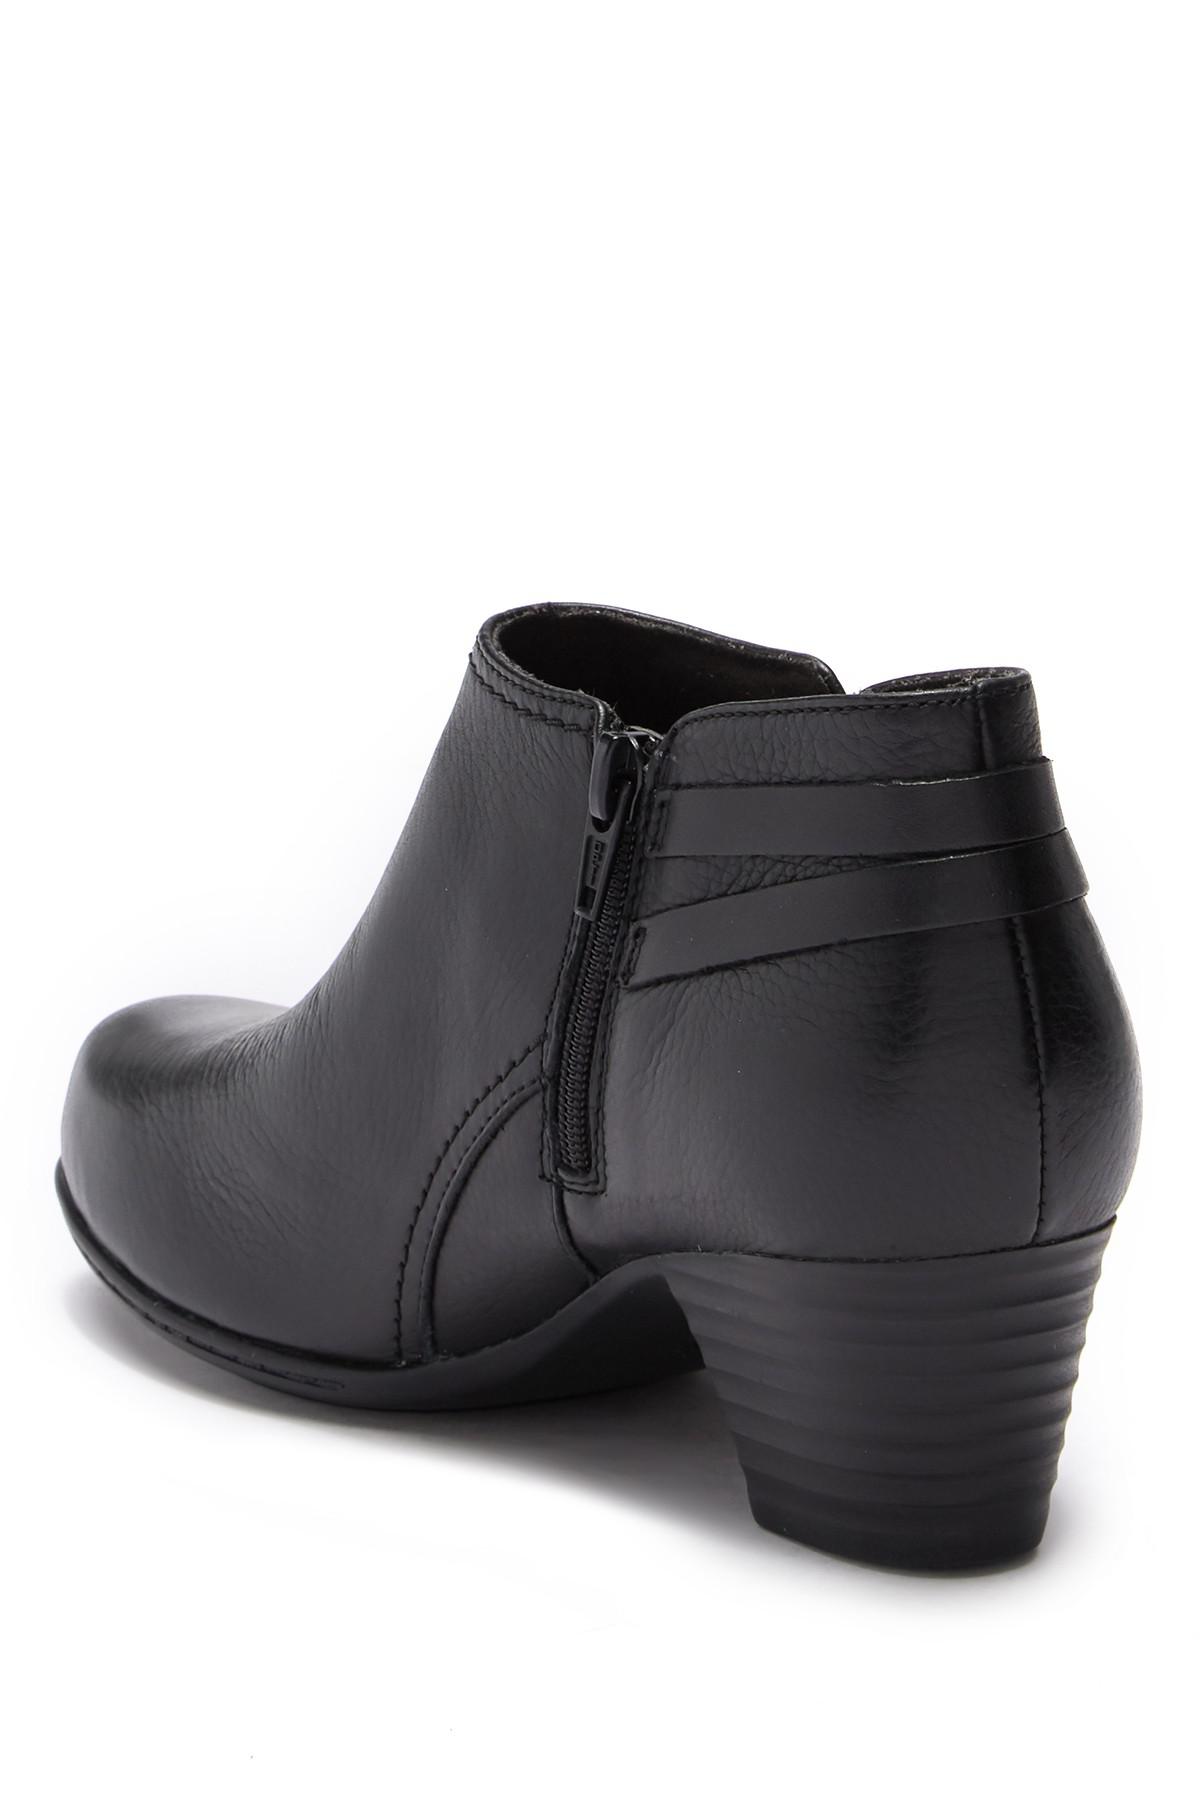 Clarks Valarie 2 Ashly Leather Ankle 